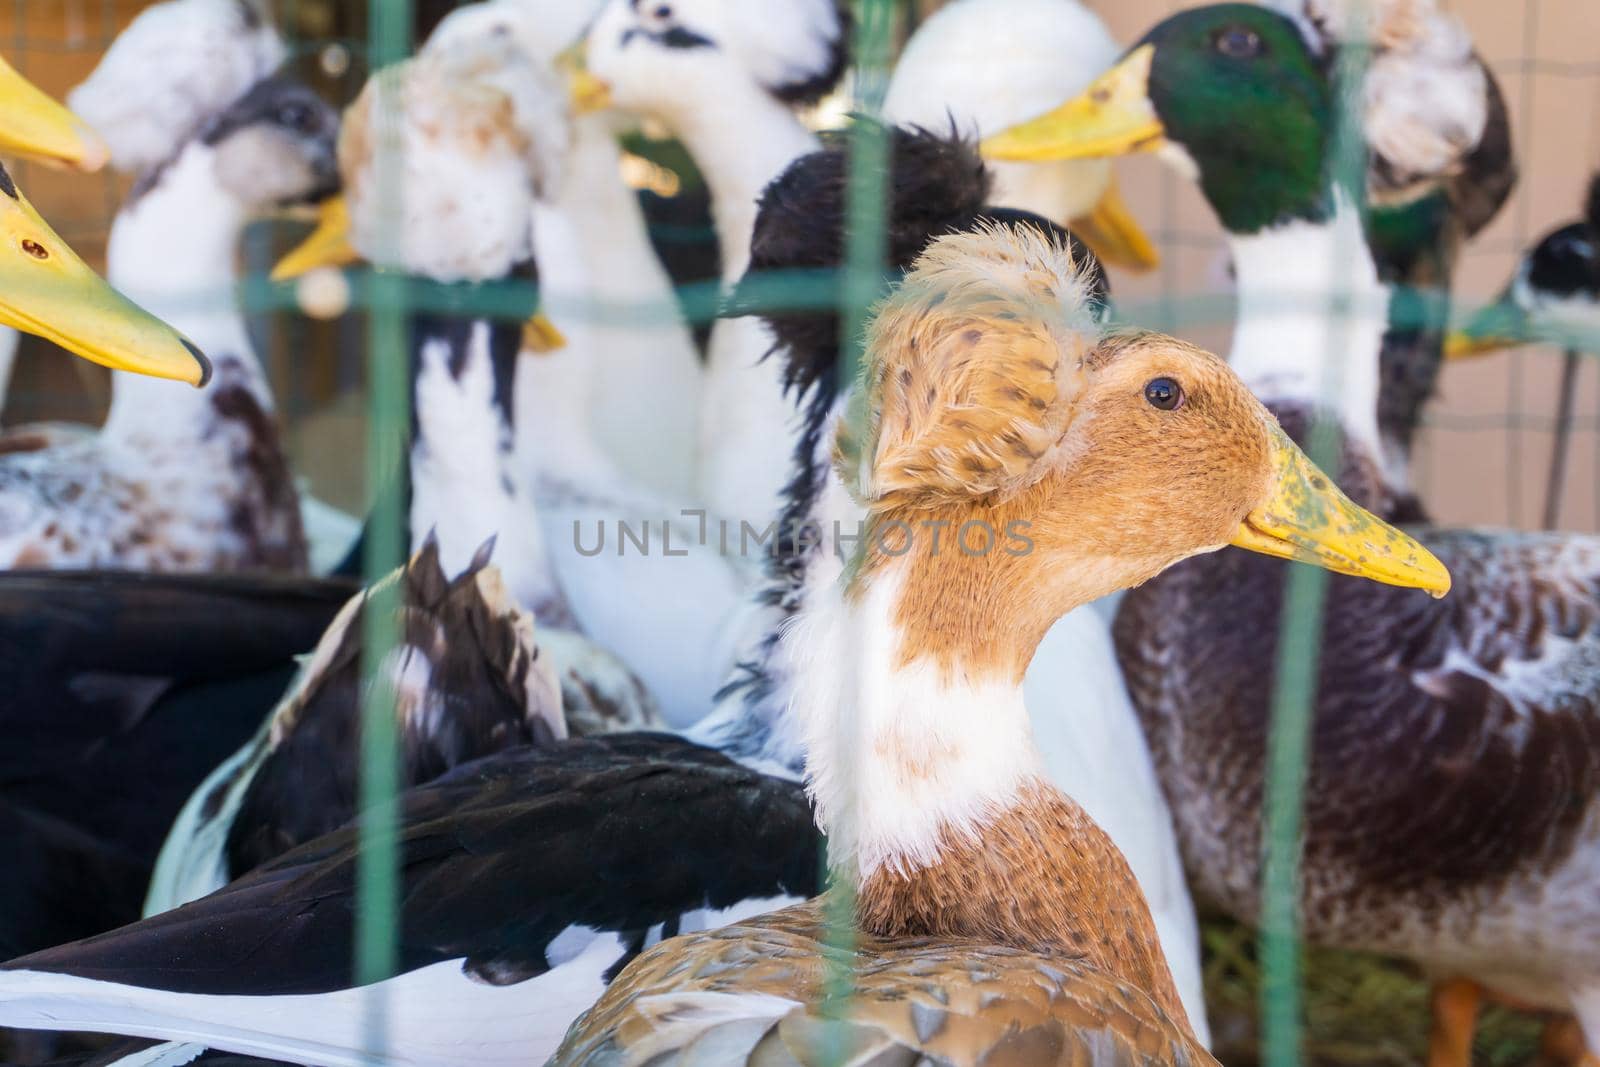 Decorative crested tufted, dutch ducks in a cage close up